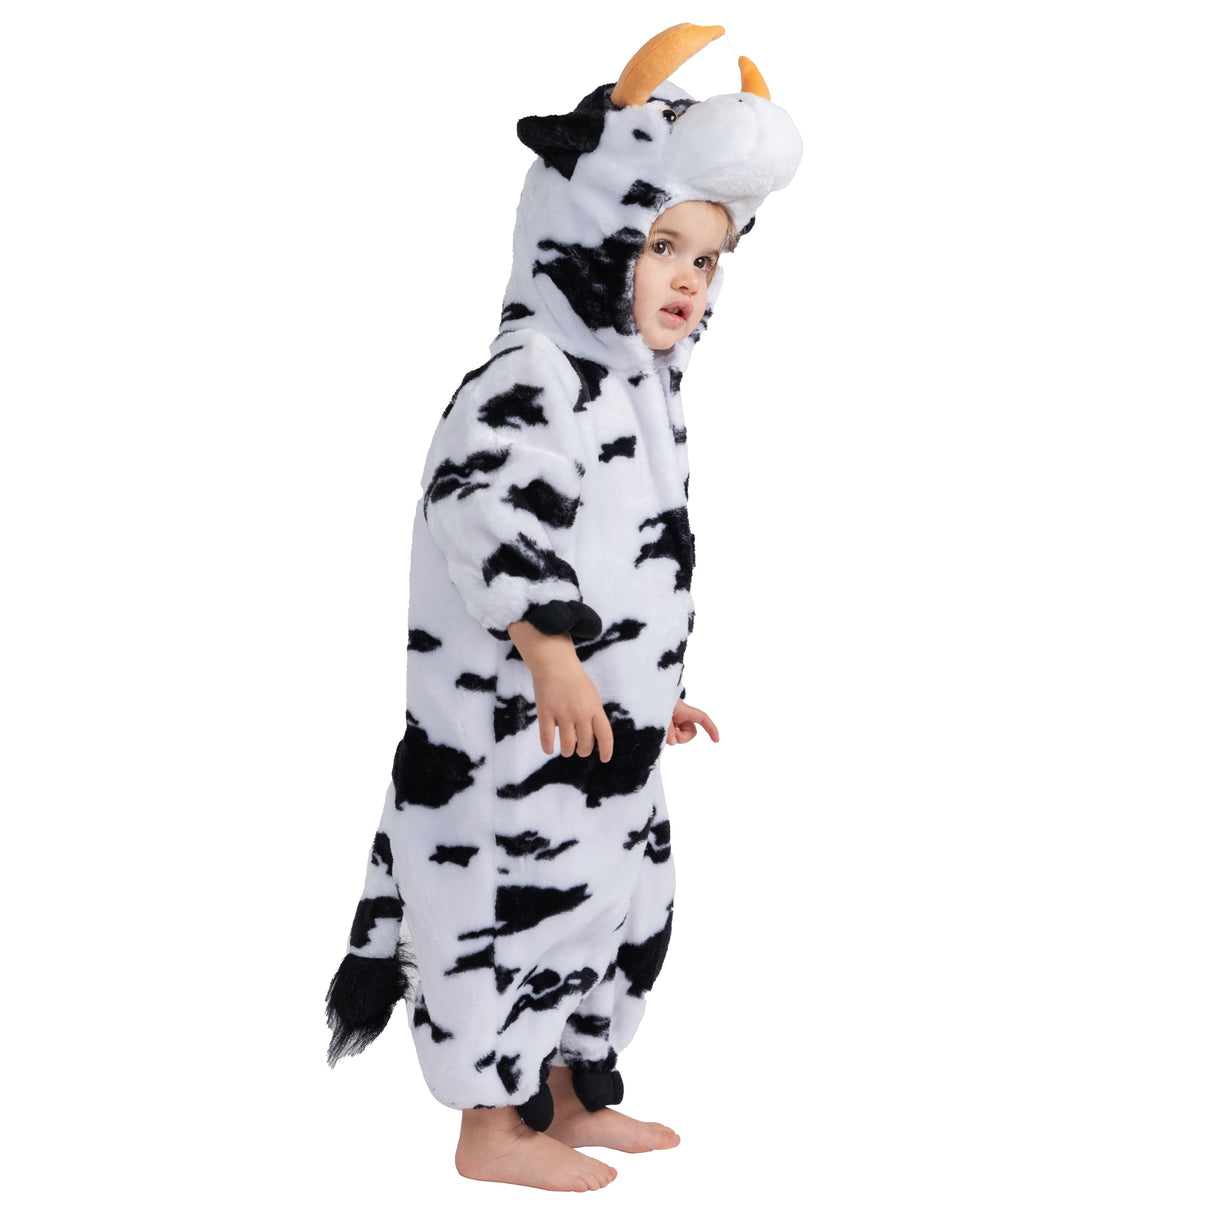 Cow Costume - Toddlers